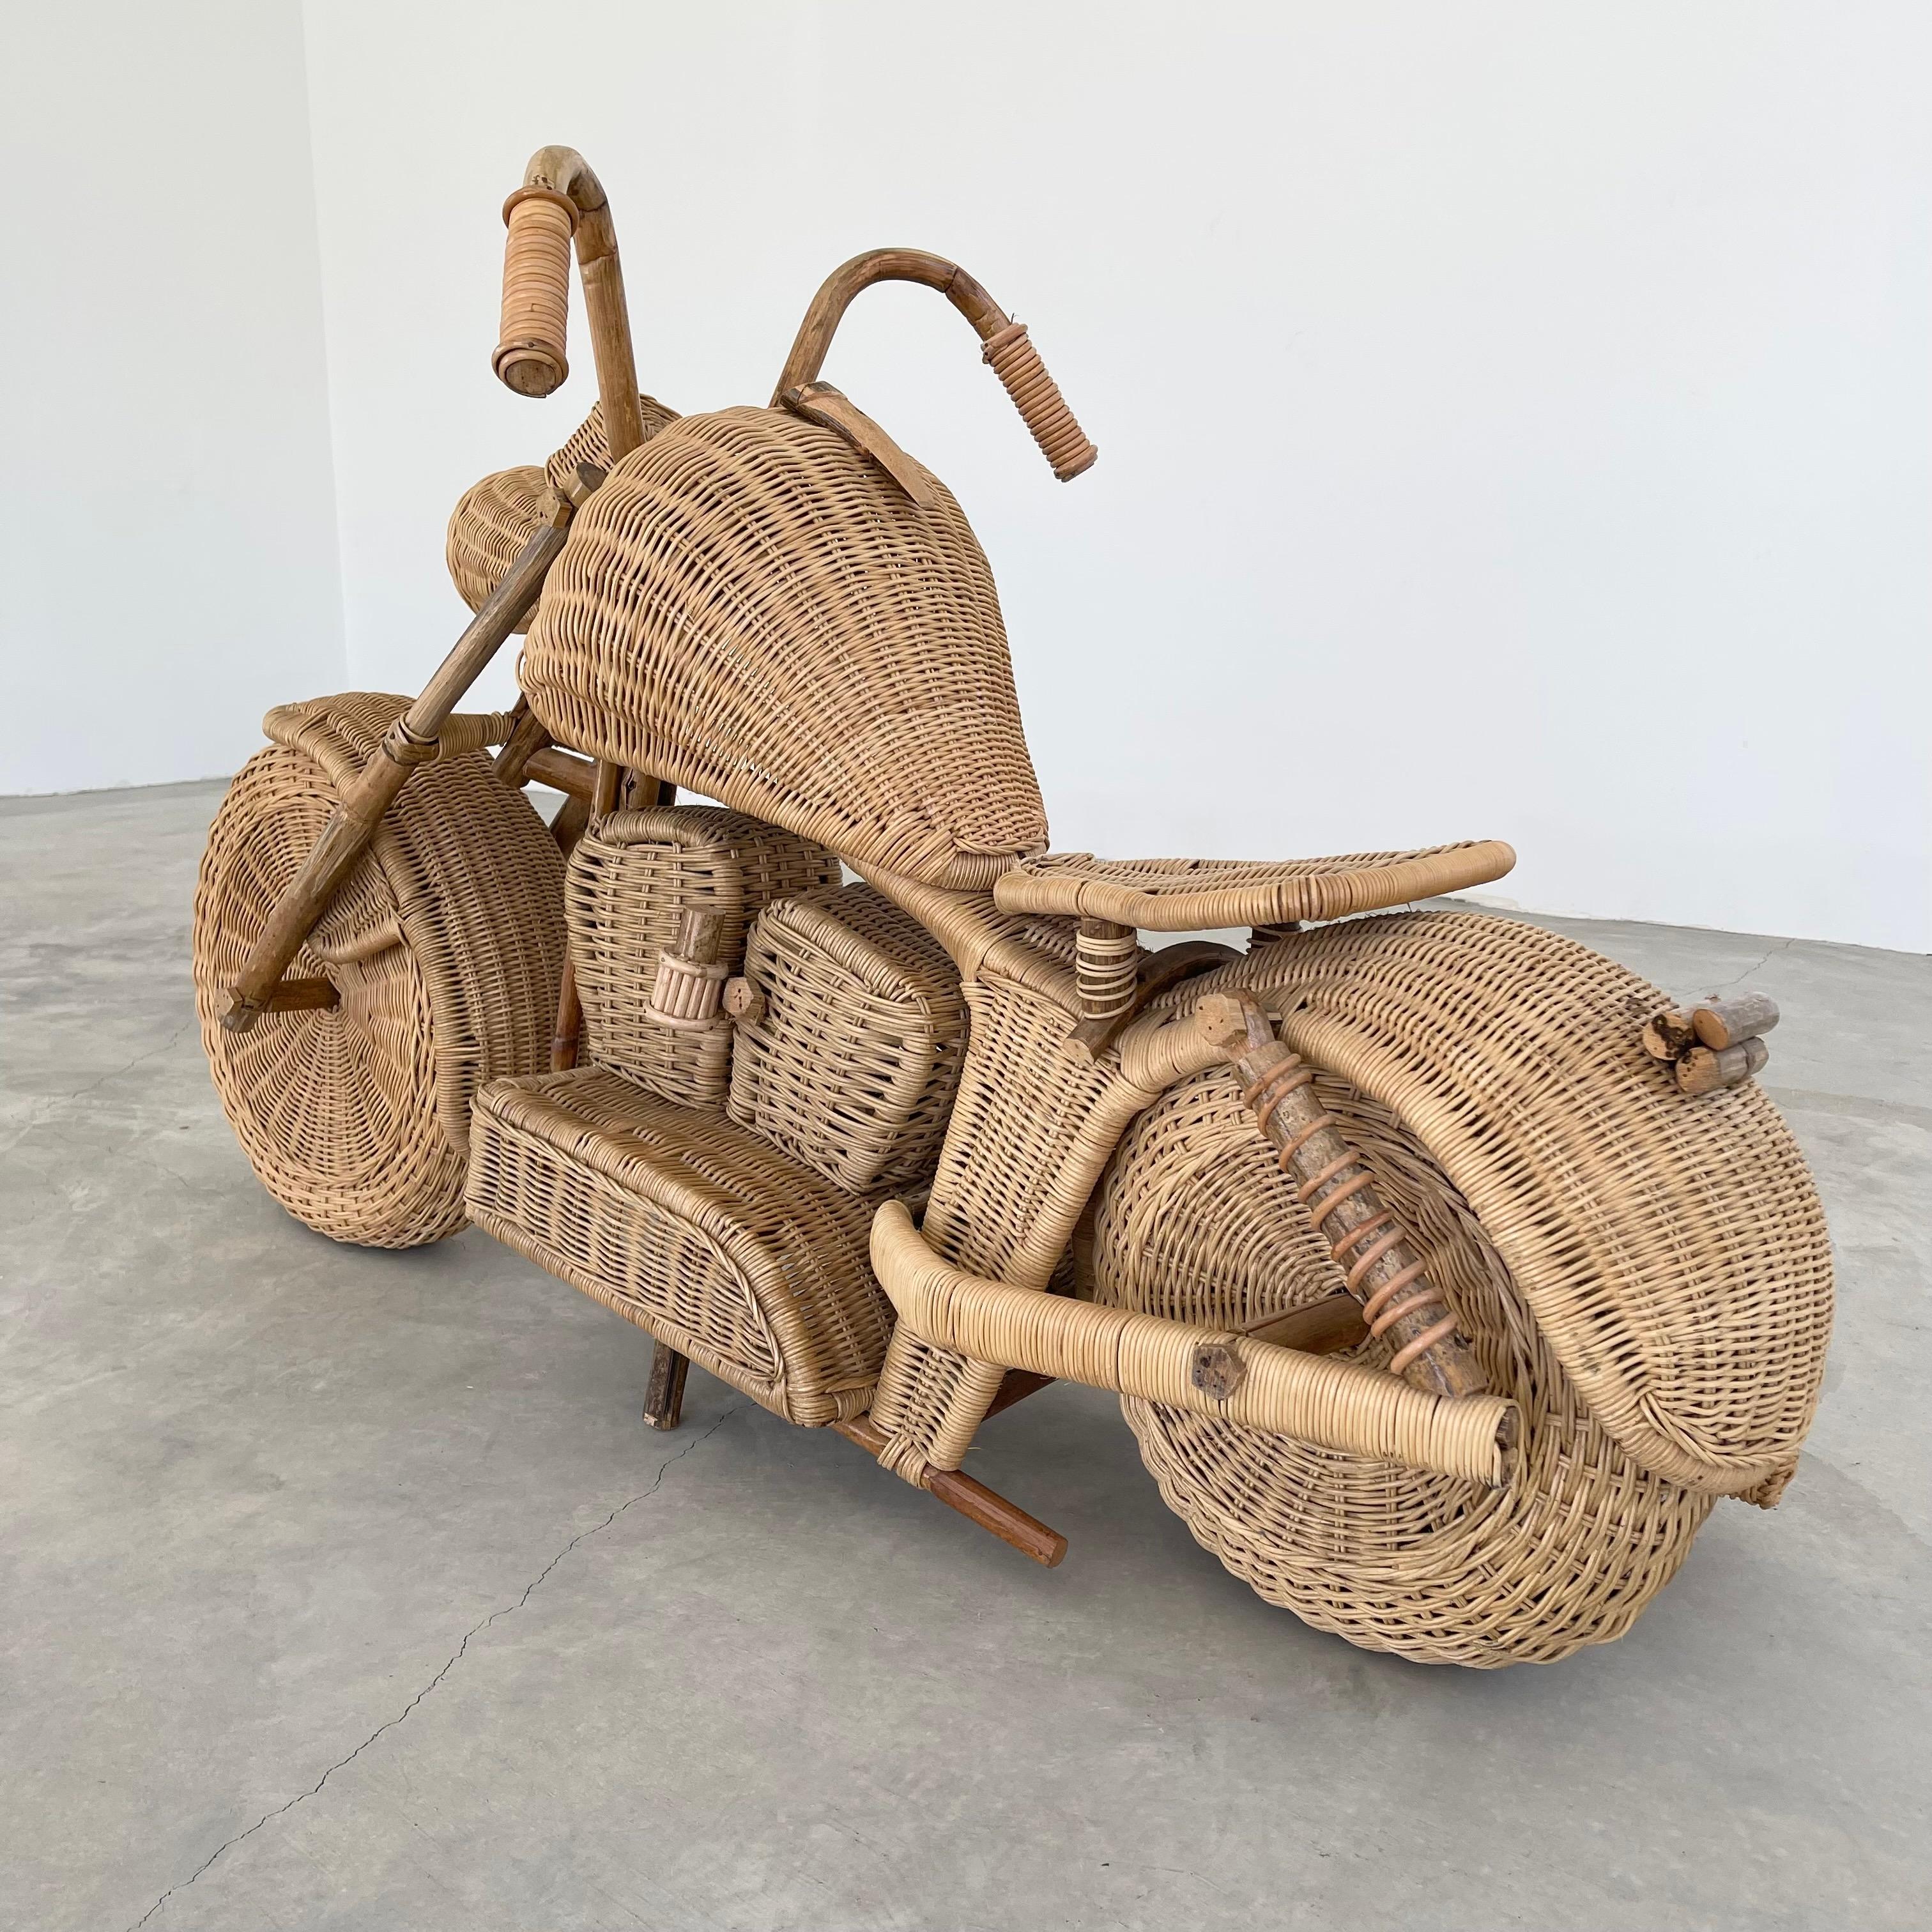 Great sculptural motorcycle made attributed to the Tom Dixon stores in the 1980s. Made of rattan, wicker and bamboo. Hand-made. Spectacular detail throughout on handlebars, wheels, gas tank, exhaust, seat etc. Super cool sculpture. Great scale. Wear